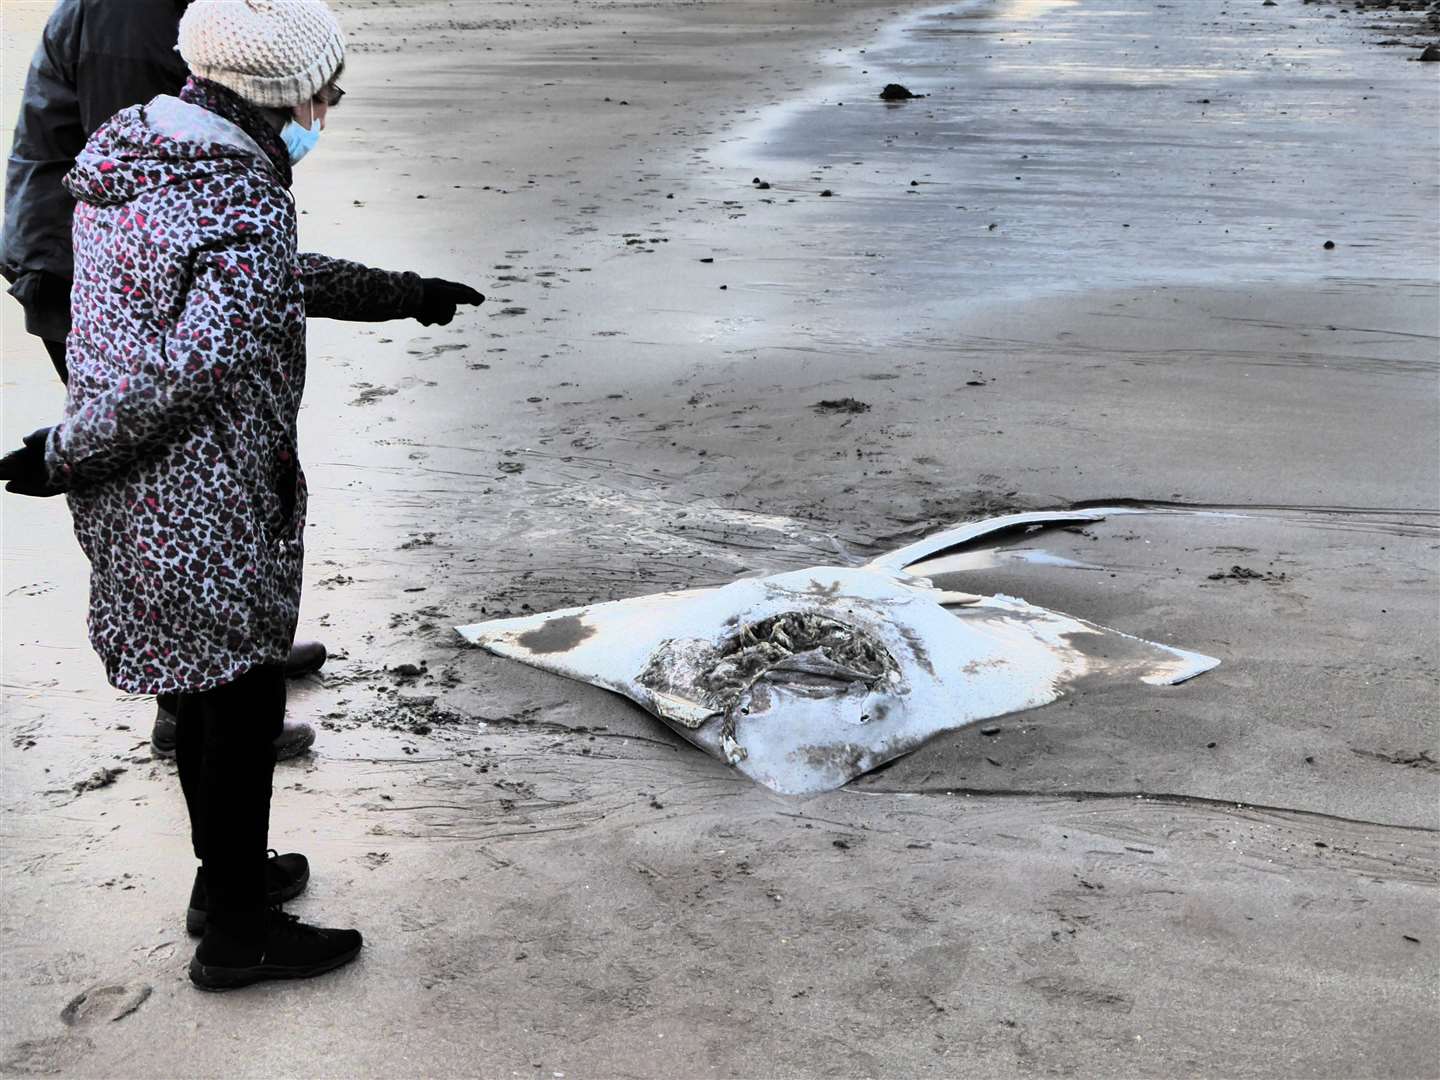 Large skate washed up at Reiss beach.